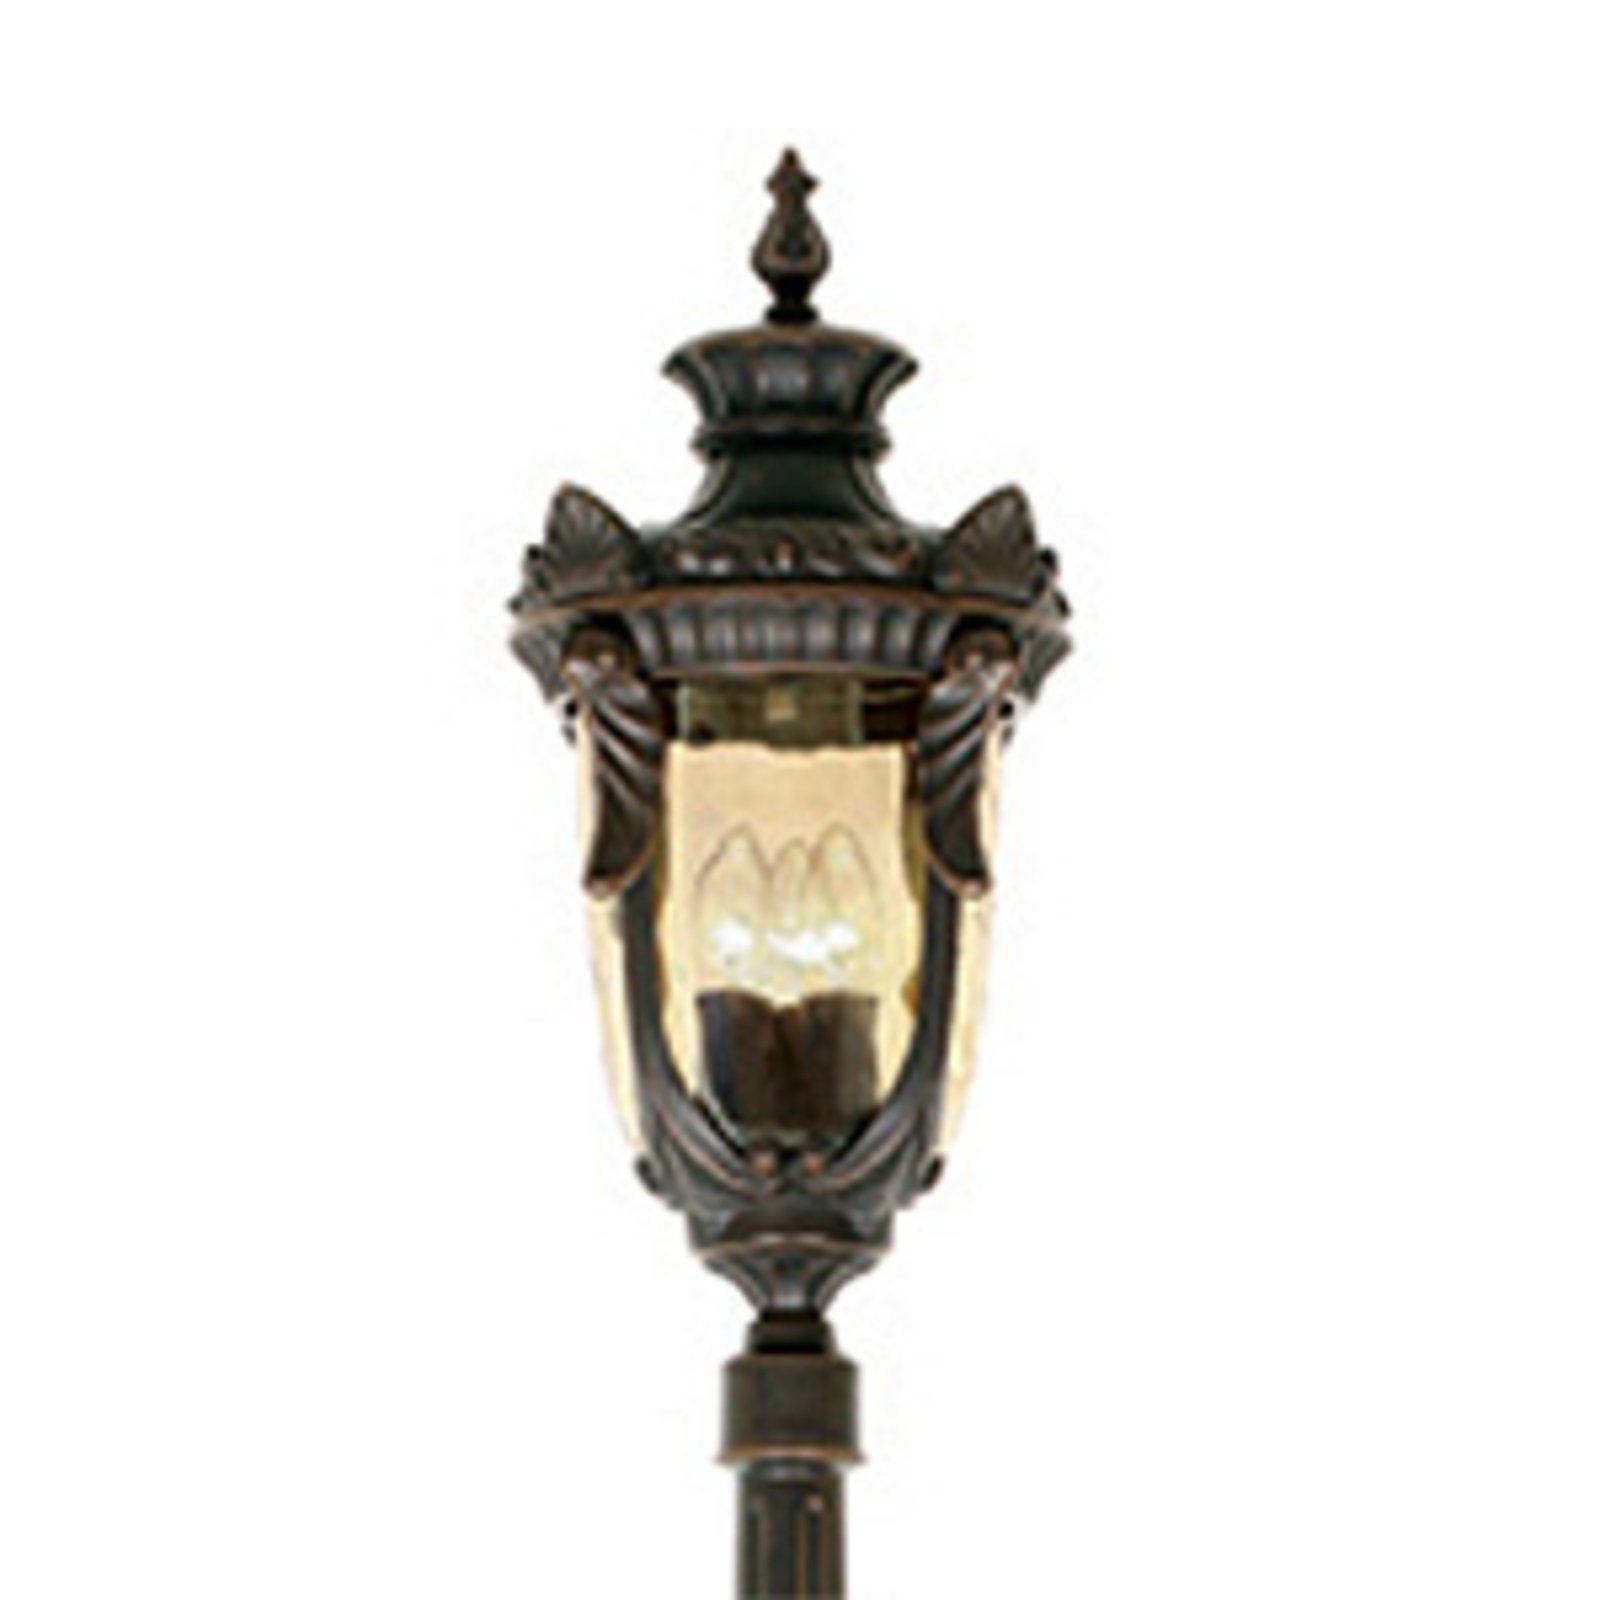 Philadelphia lamp post in the style of the 1900s